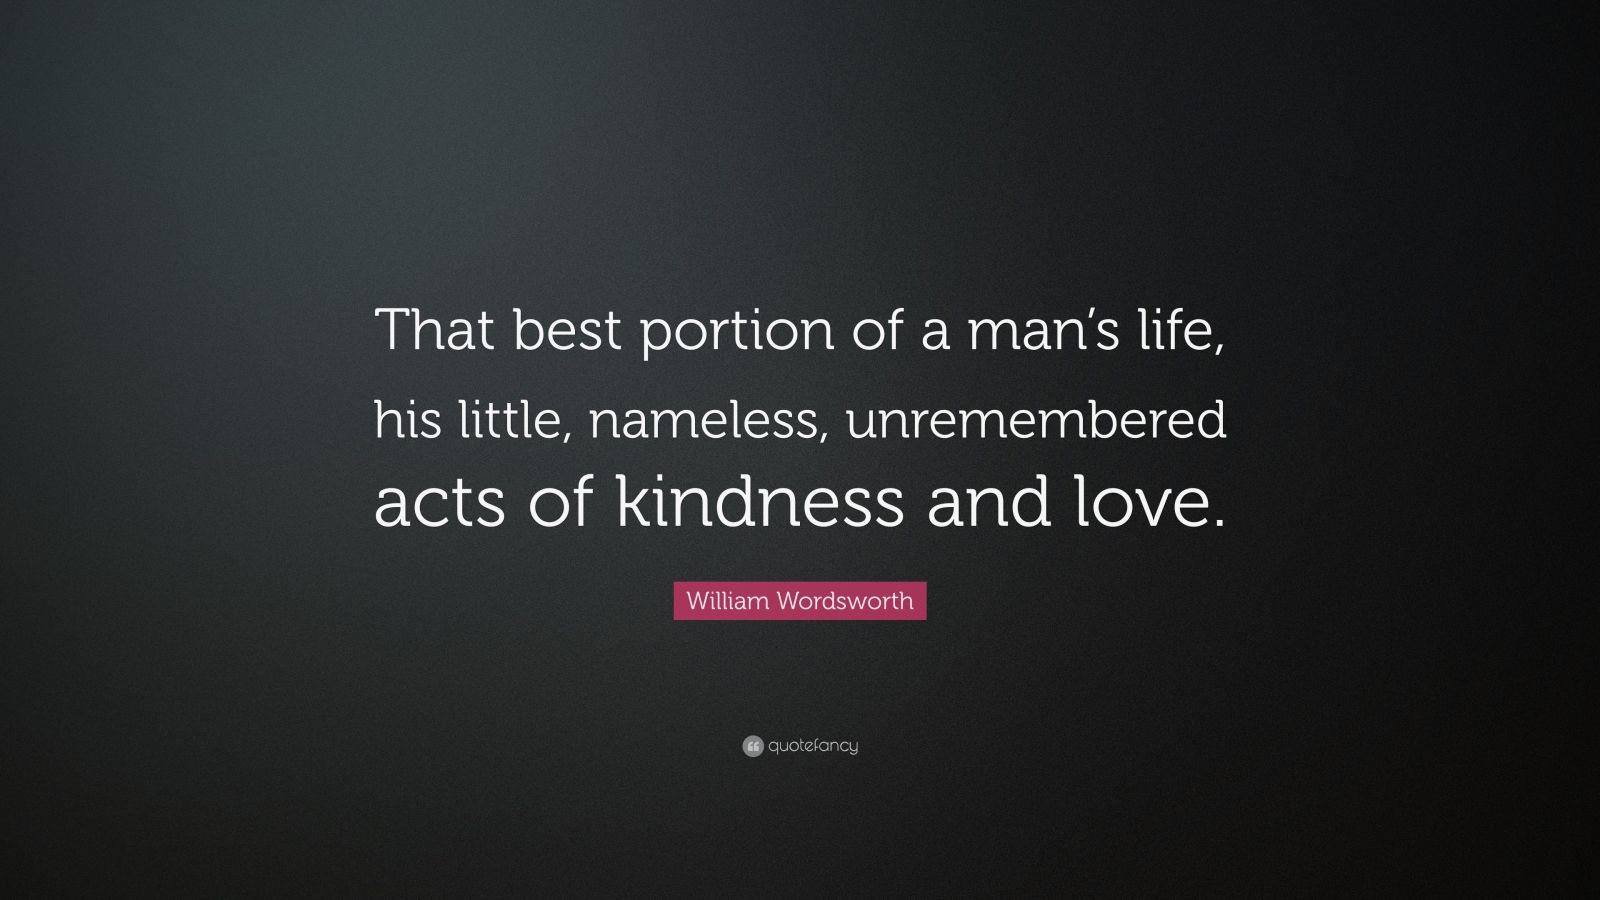 William Wordsworth Quote: “That best portion of a man’s life, his ...